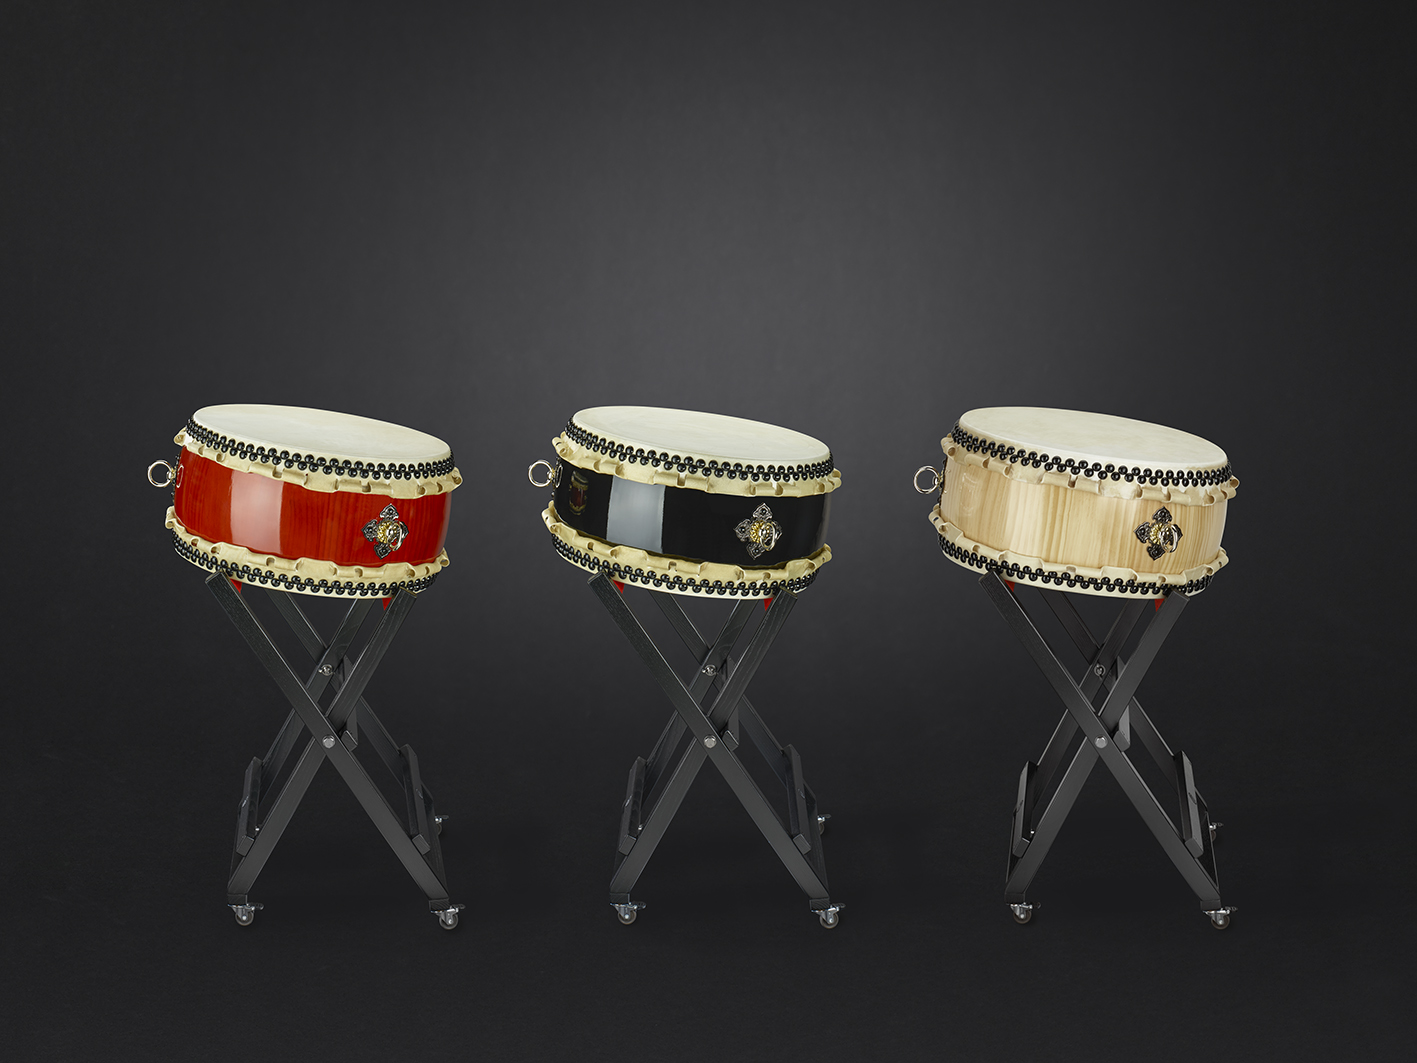 Hira-Daiko hq. drums (48cm/h:25cm) with X-stand and wheels   (695 / 195)